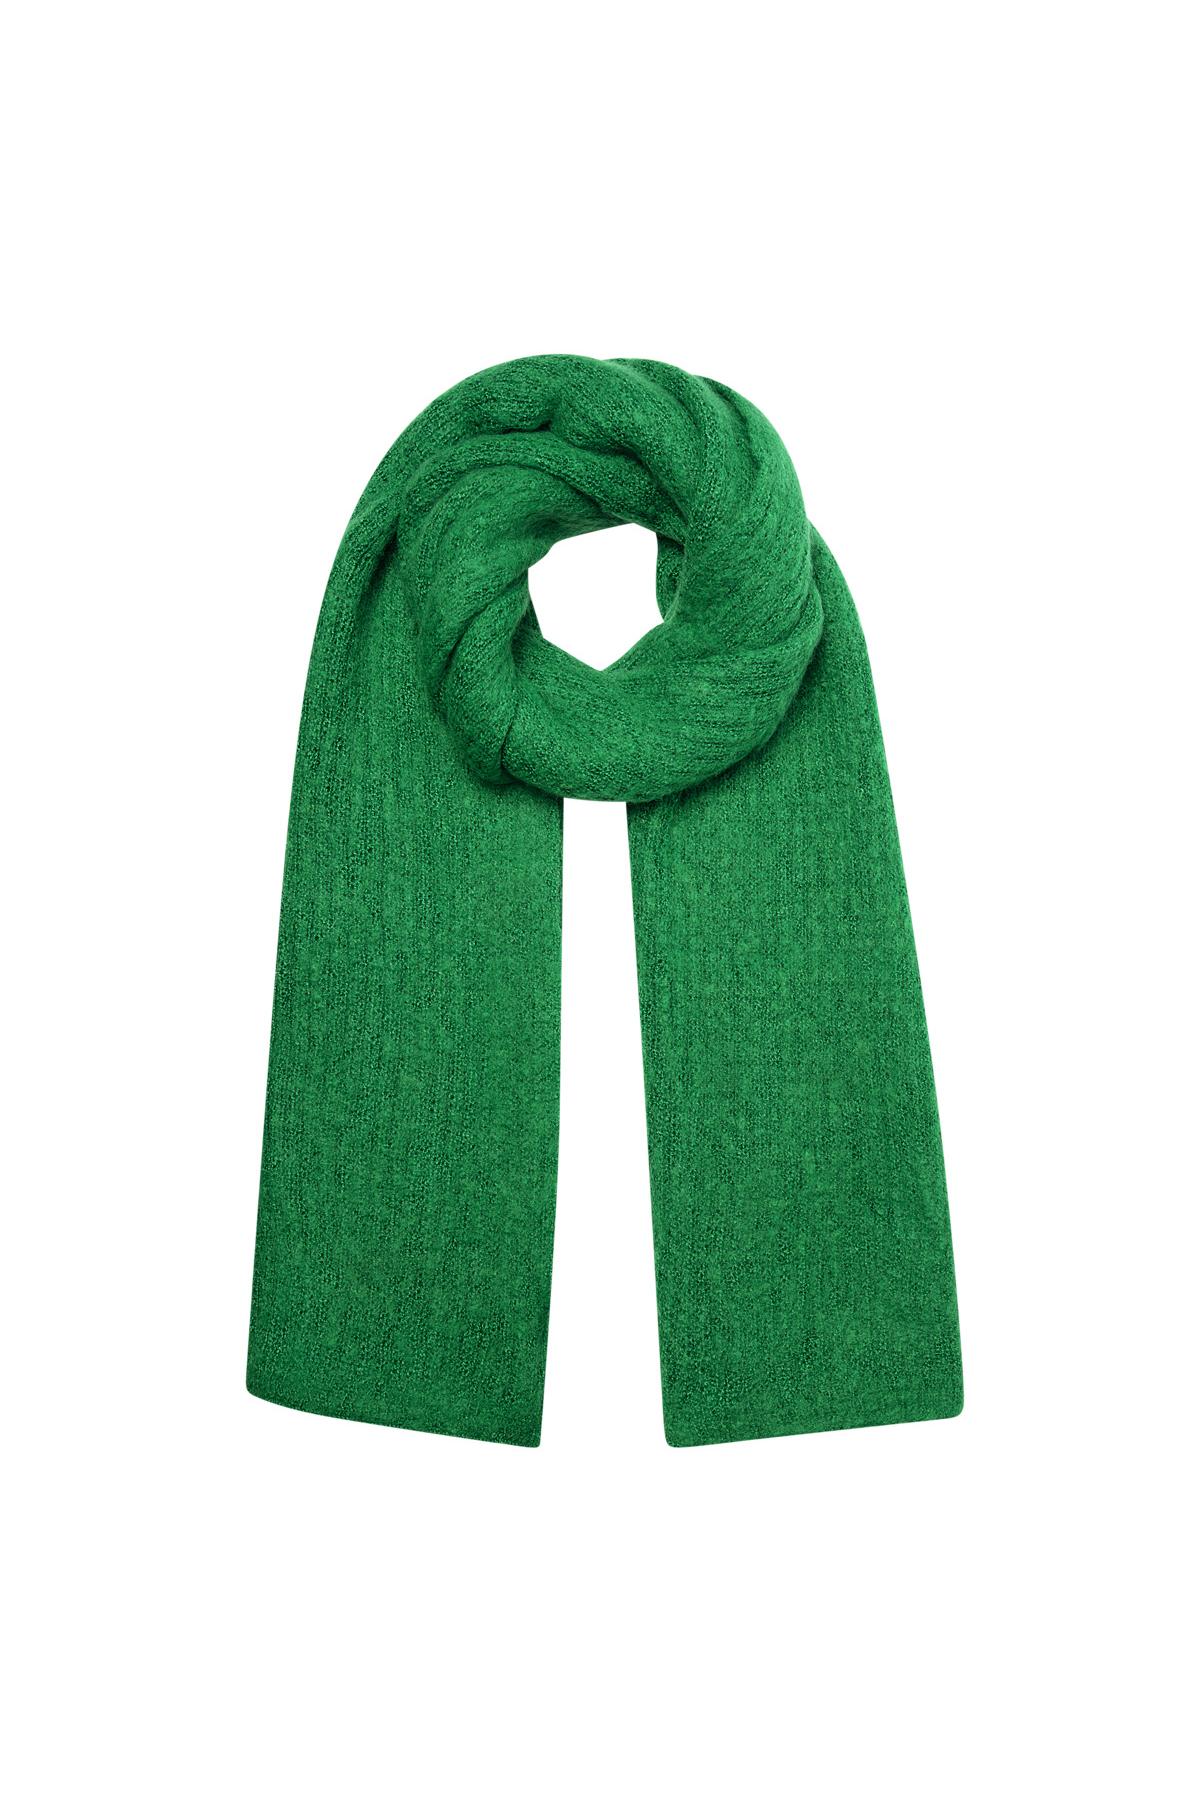 Scarf knitted plain - green